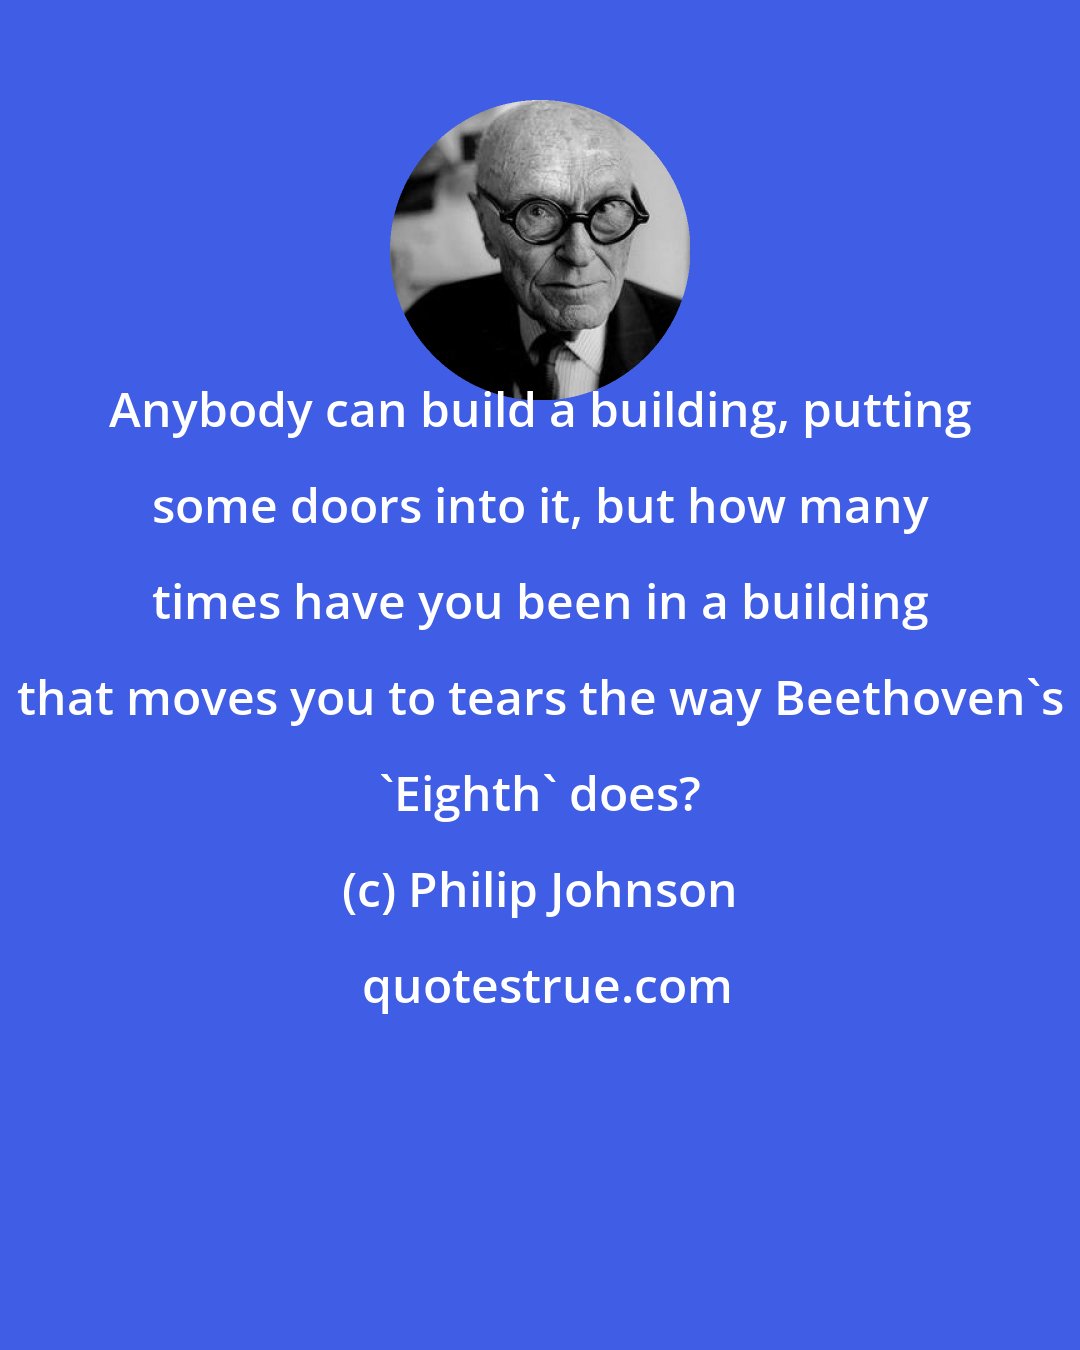 Philip Johnson: Anybody can build a building, putting some doors into it, but how many times have you been in a building that moves you to tears the way Beethoven's 'Eighth' does?